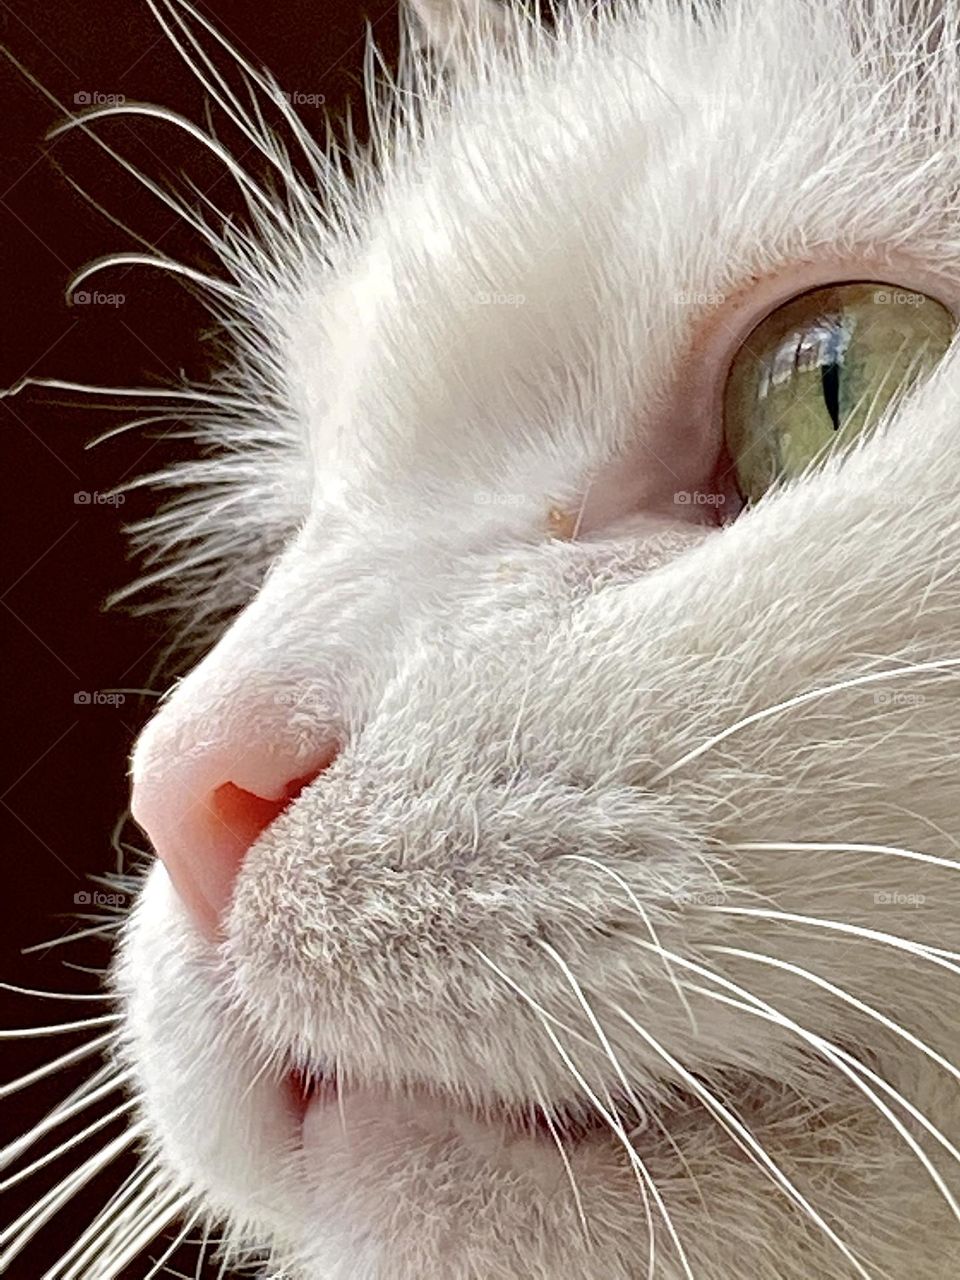 Close up of the face of a fluffy white cat with green eyes